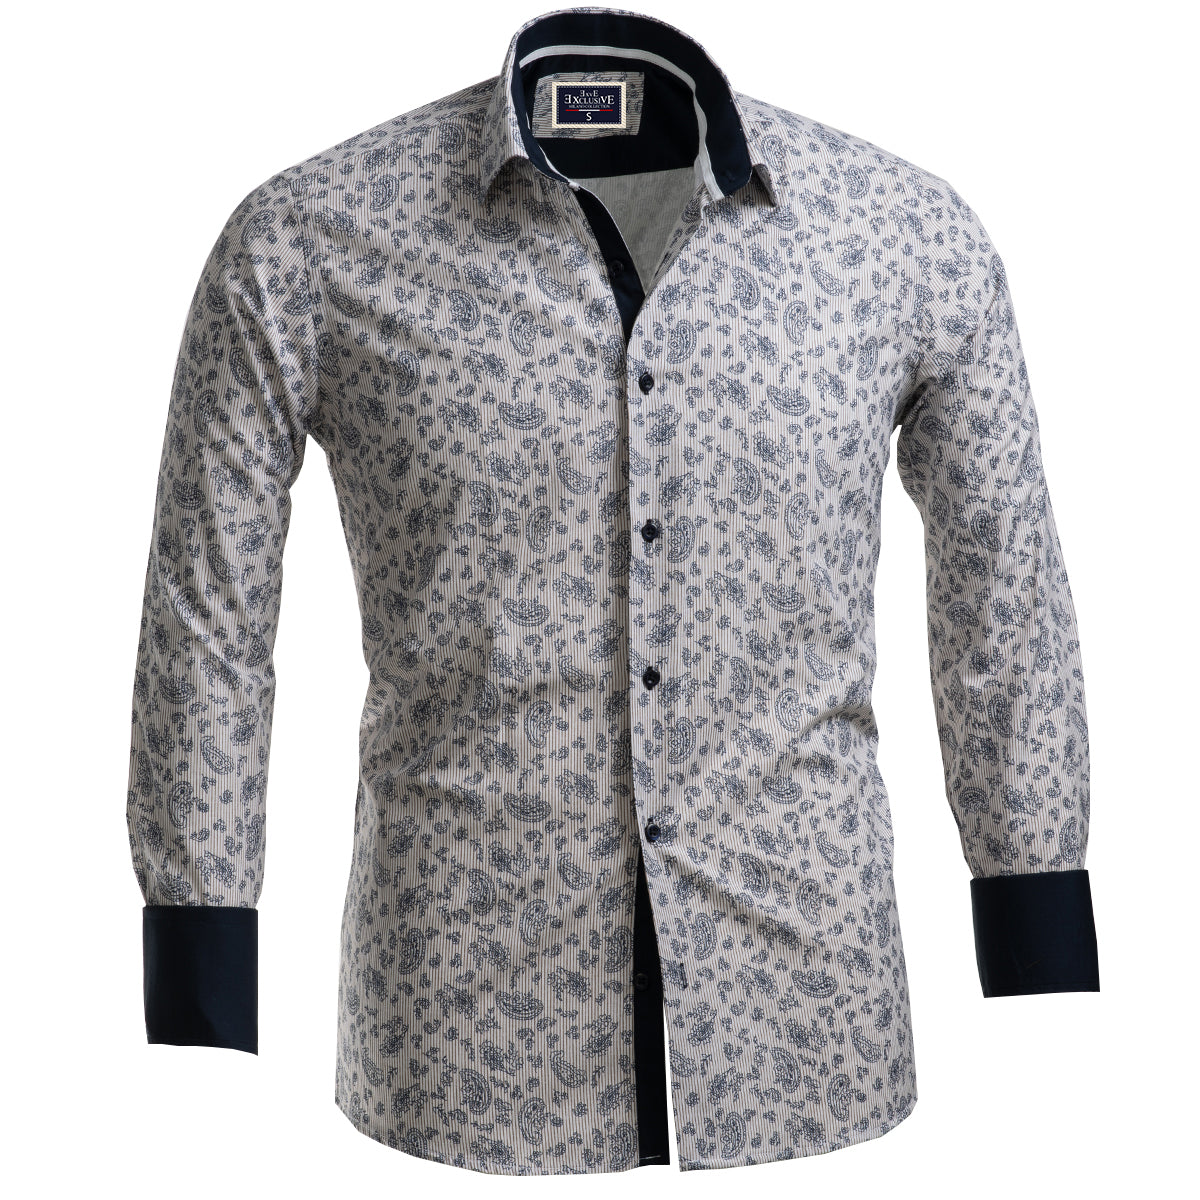 Light Grey Floral Mens Slim Fit French Cuff Shirts with Cufflink Holes - Casual and Formal